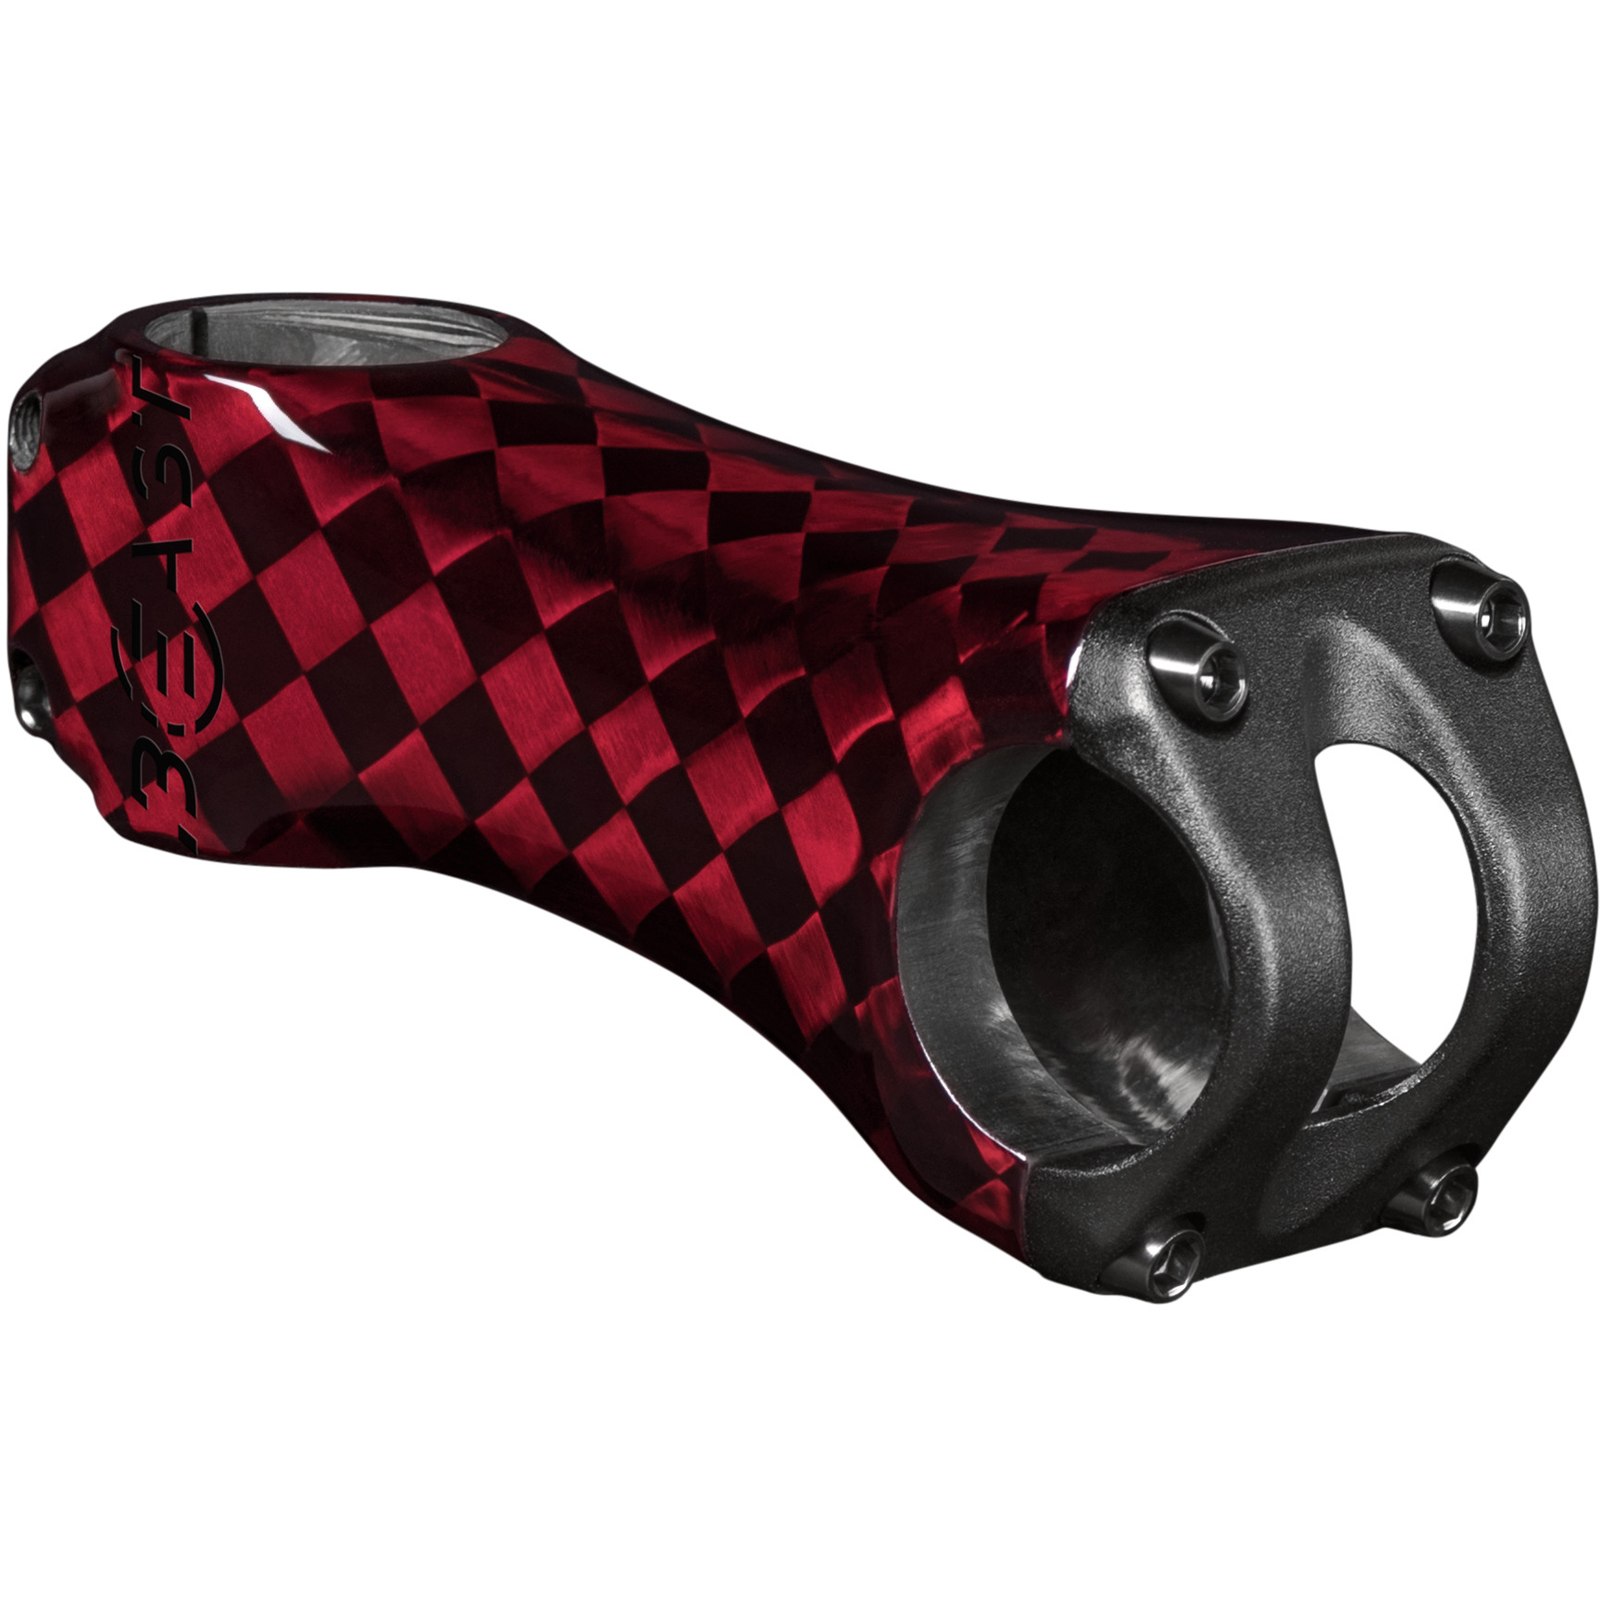 Picture of Beast Components Road Carbon Stem 31.8mm - 6° - SQUARE red